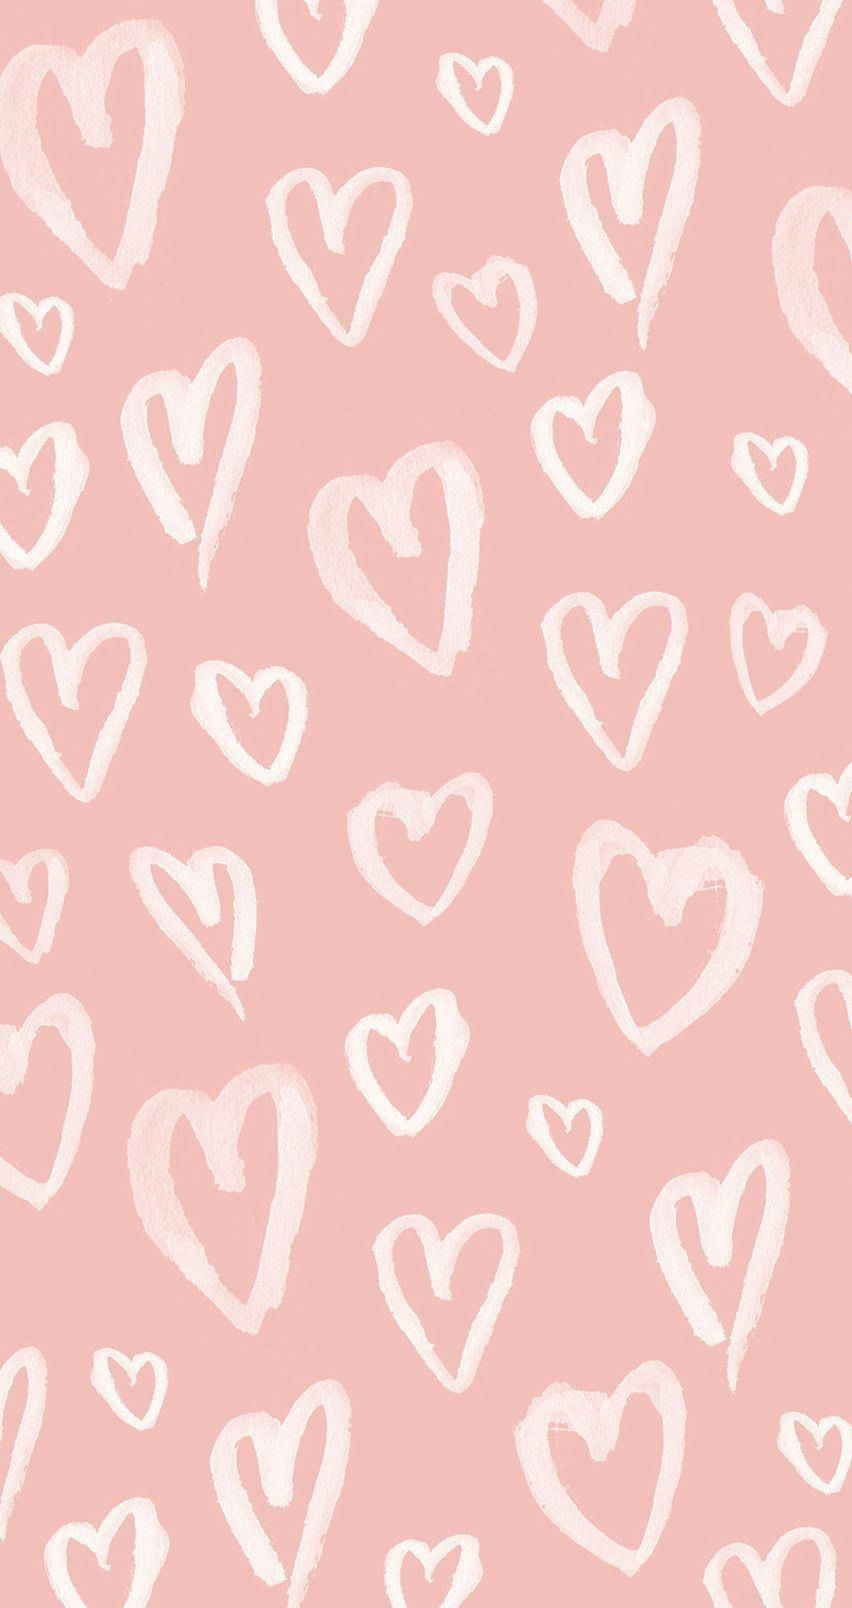 Aesthetic Pink Iphone White Hearts Wallpaper